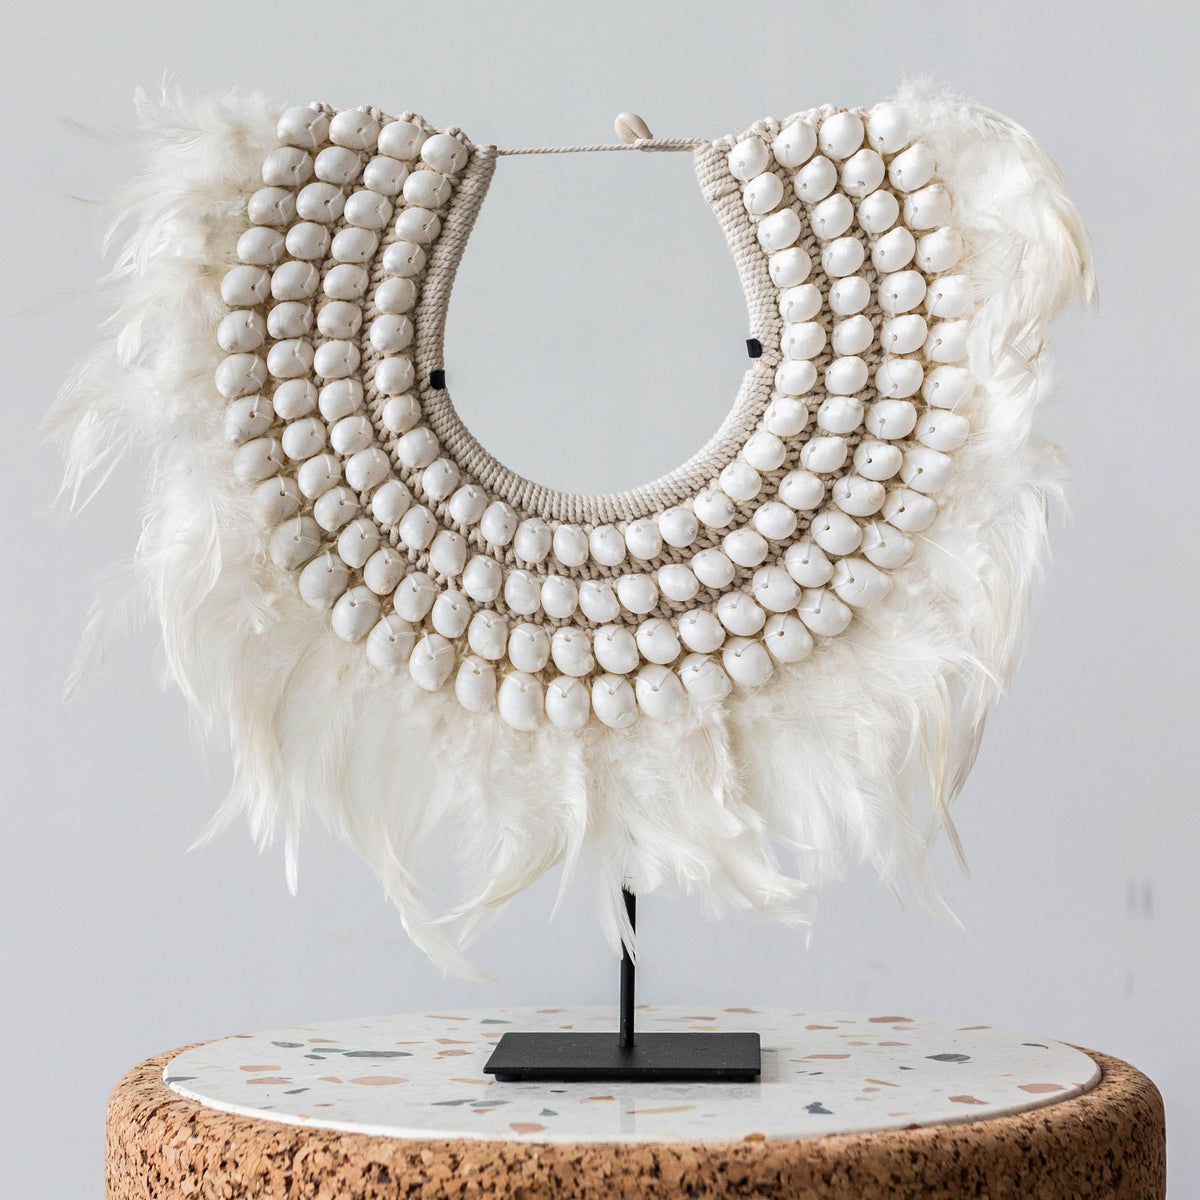 Feathered Shell Statement Necklace kanju interiors African décor mounted handcrafted collar necklace décor decorative decoration shell stand display shelf mantel table unique traditional modern stylish hand made boho accent small medium large statement Cameroon home goods gift white sliced whole shell